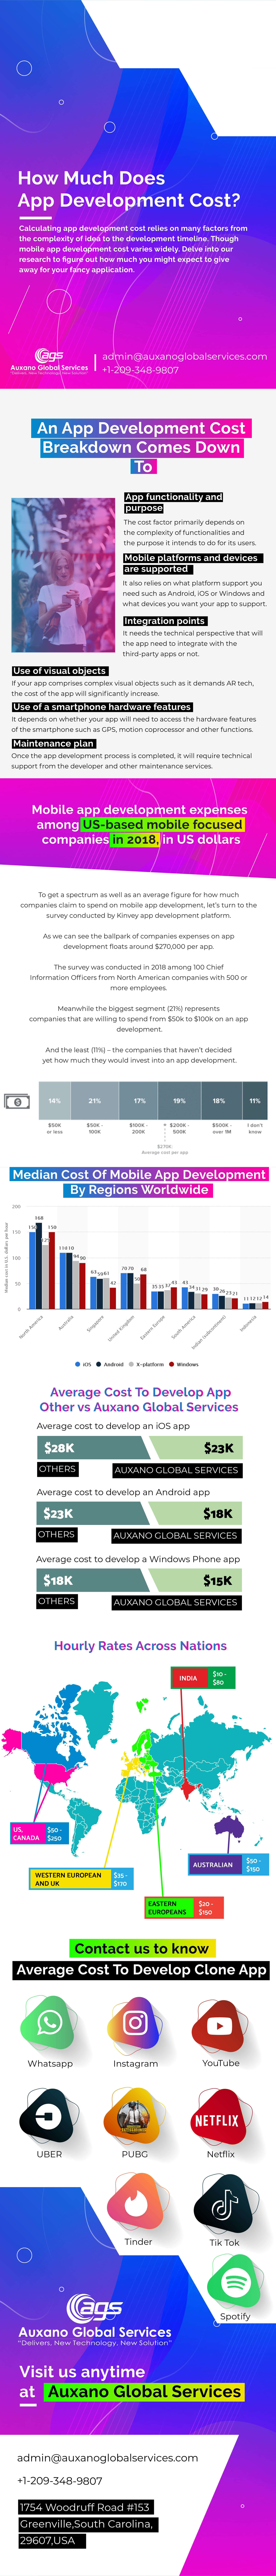 How Much Does App Development Cost